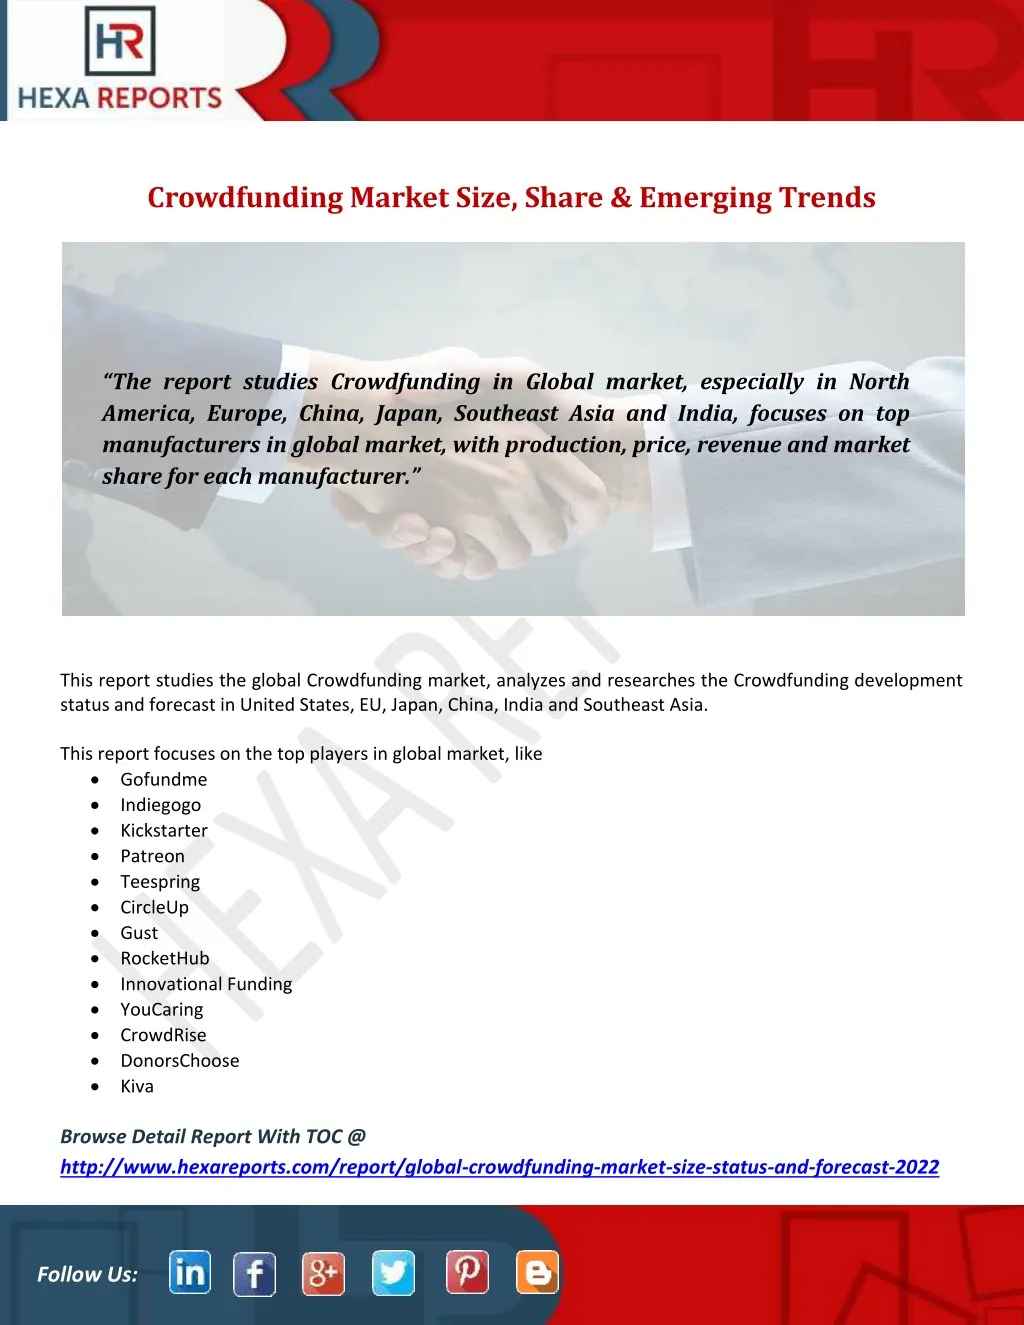 crowdfunding market size share emerging trends